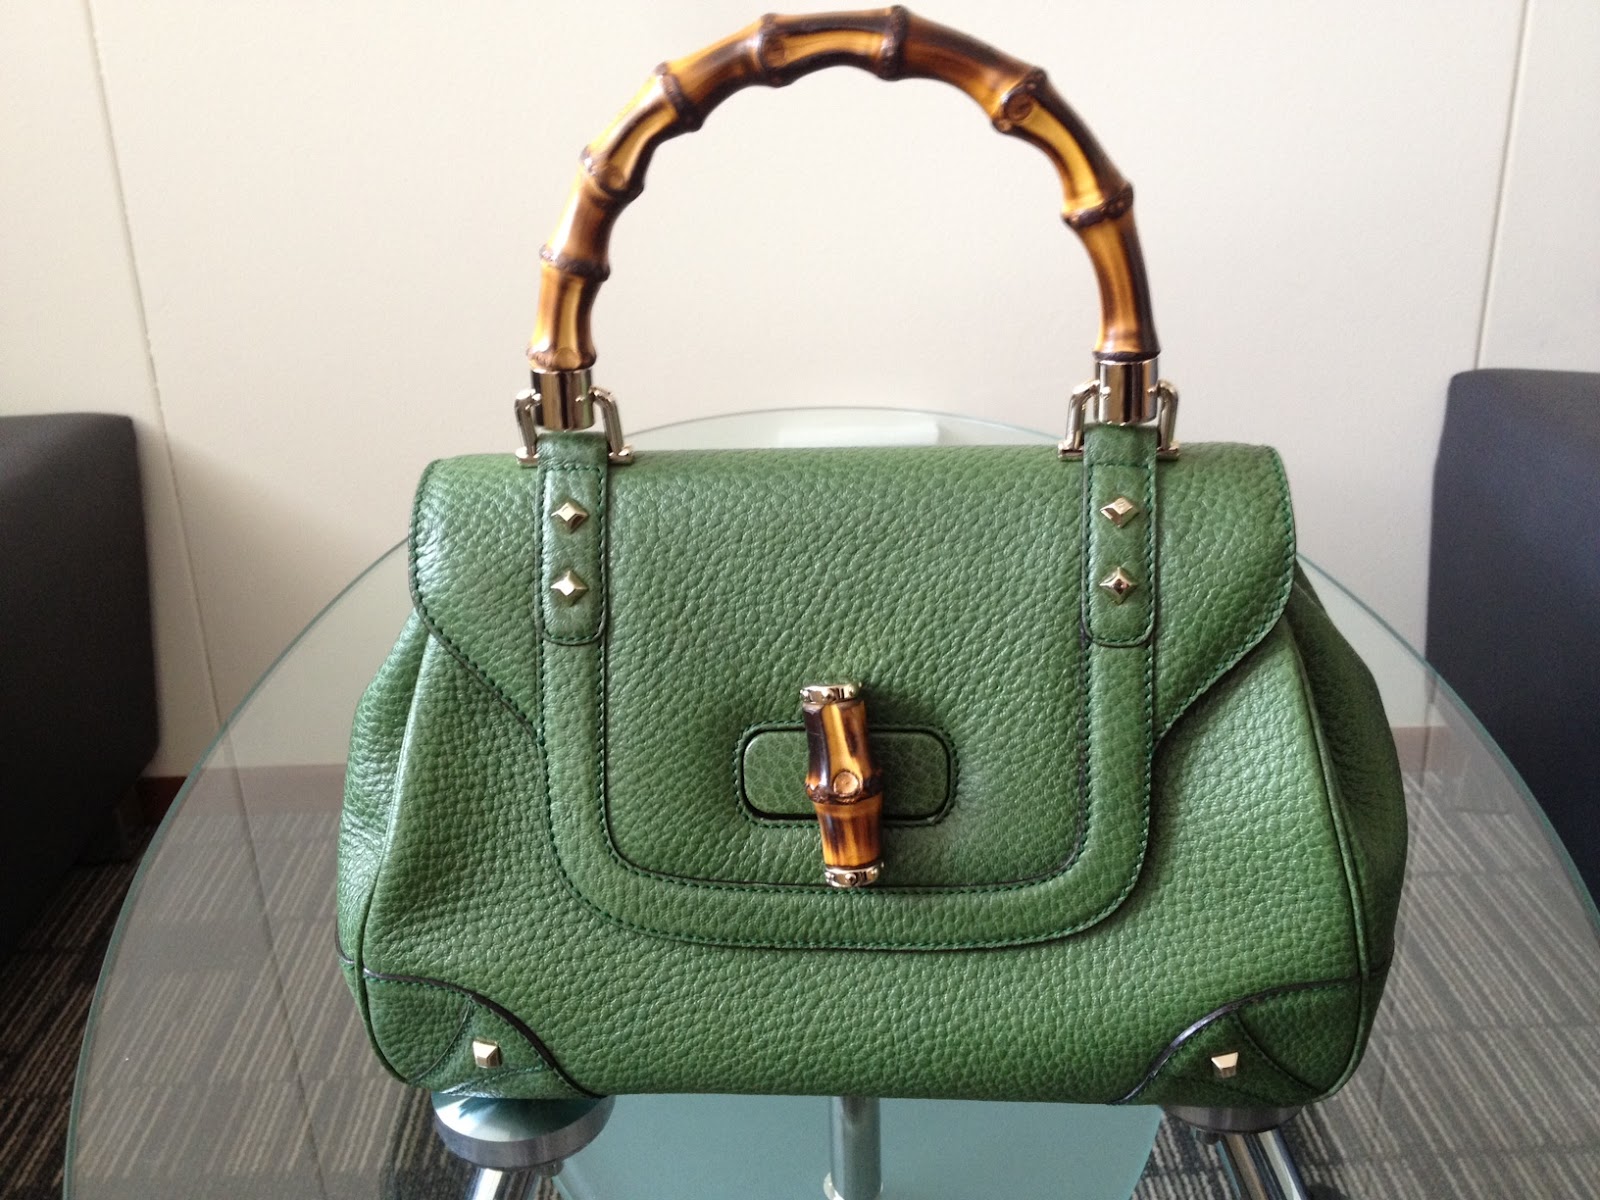 Where bag lovers meet ..AUTHENTIC designer bags for sale and rent: For Rent - Gucci Bamboo Tote